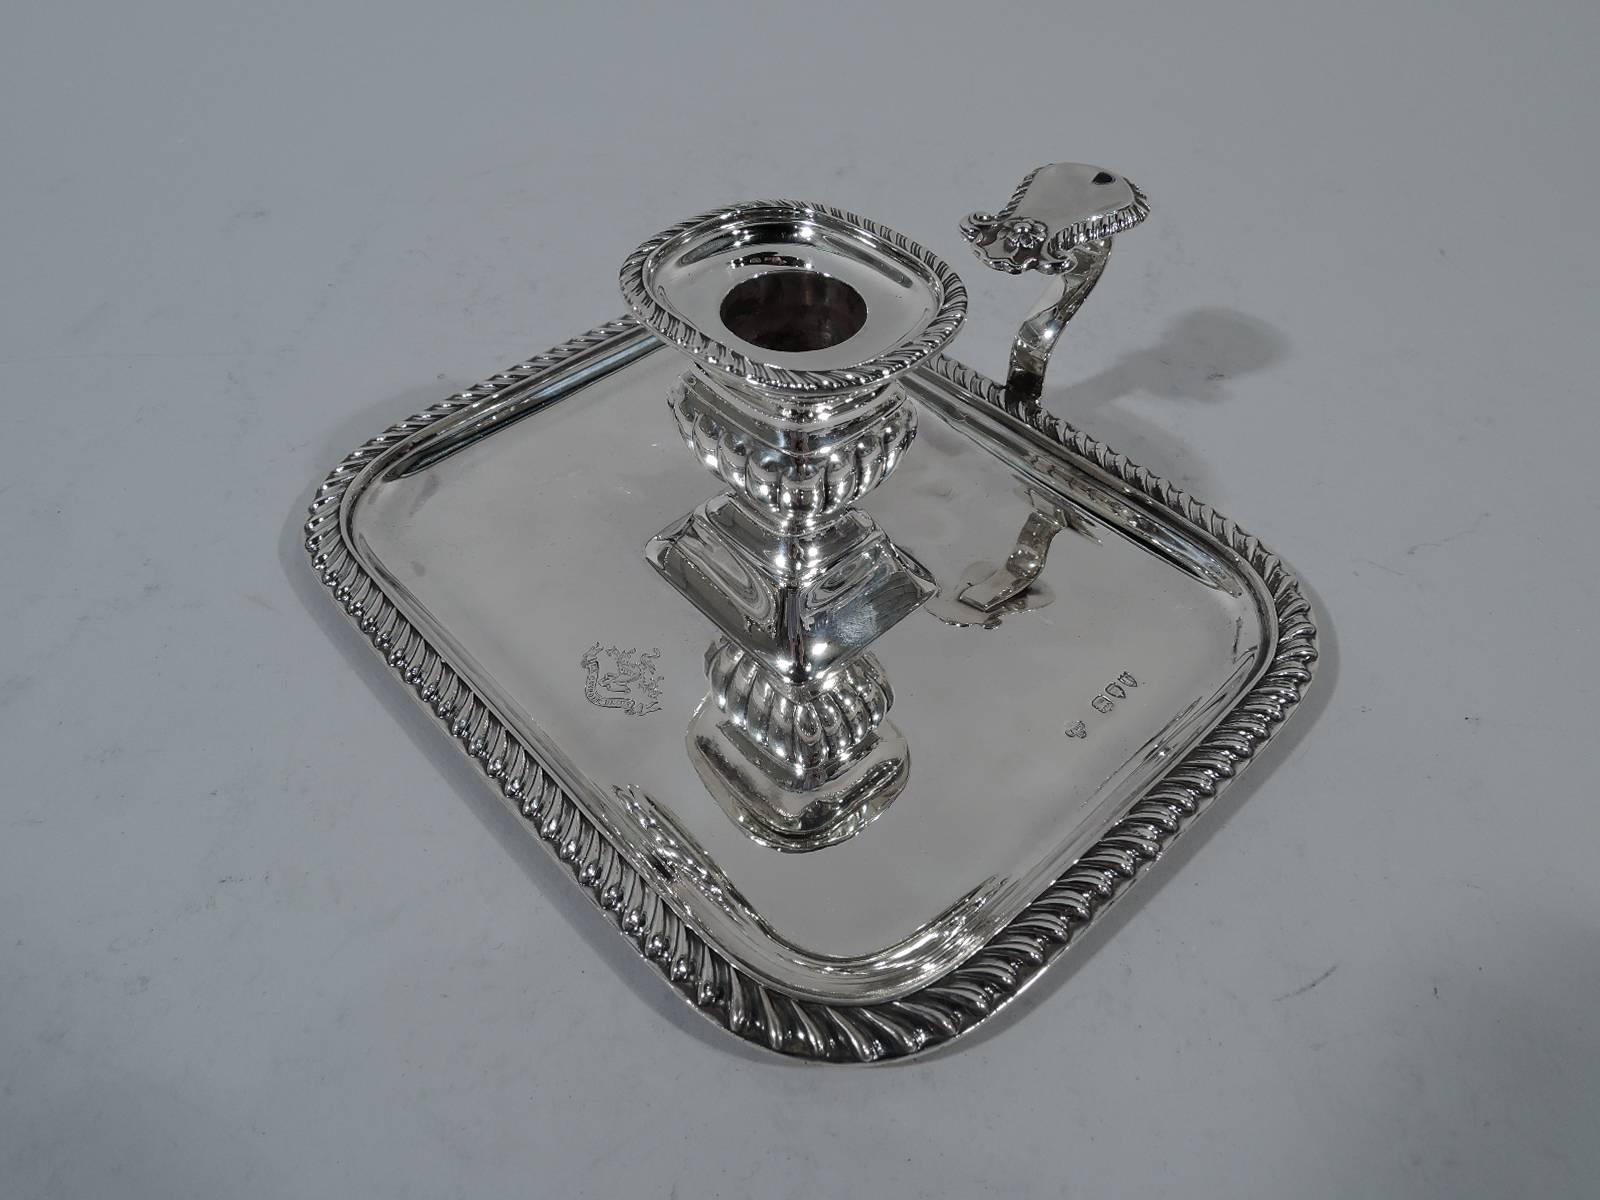 Victorian sterling silver chamberstick. Made by Horace Woodward & Co. in London in 1894. Lobed and bellied socket on raised trapezoidal base mounted to center of rectangular tray. Scrolled handle with impressed thumb rest. Thumb rest, tray, and